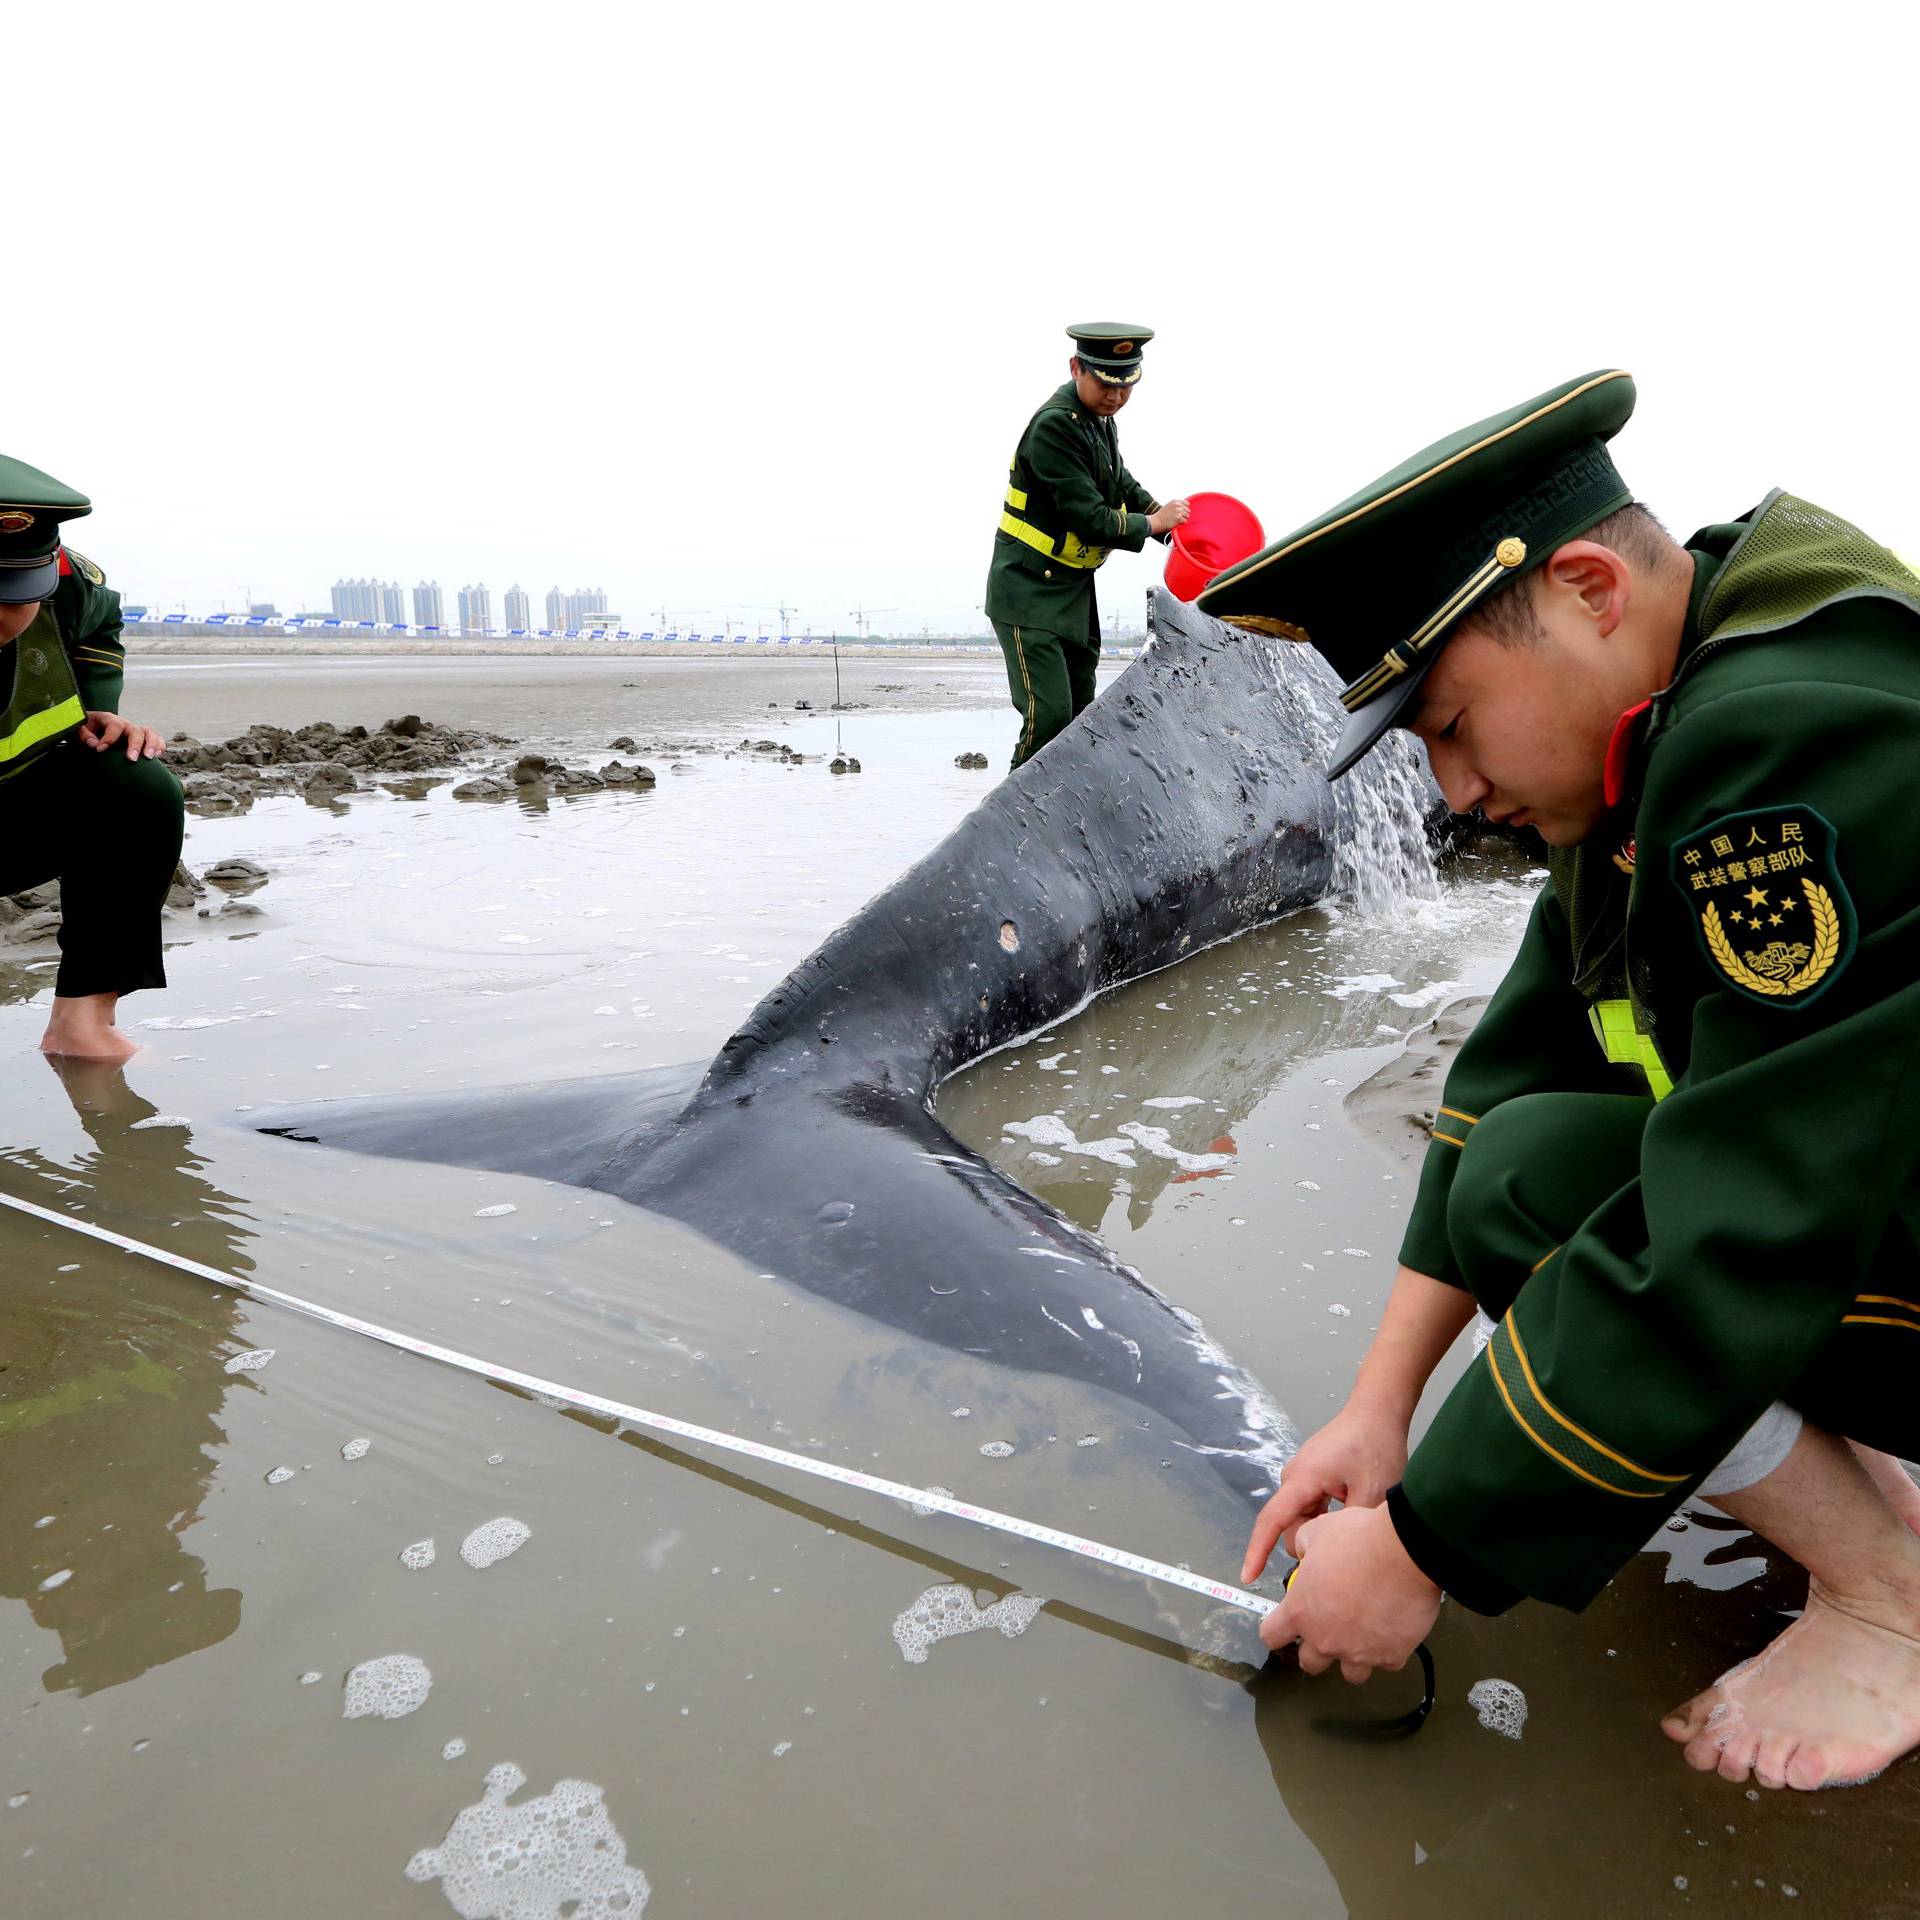 Chinese paramilitary policemen measure a stranded humpback whale at a beach in Qidong